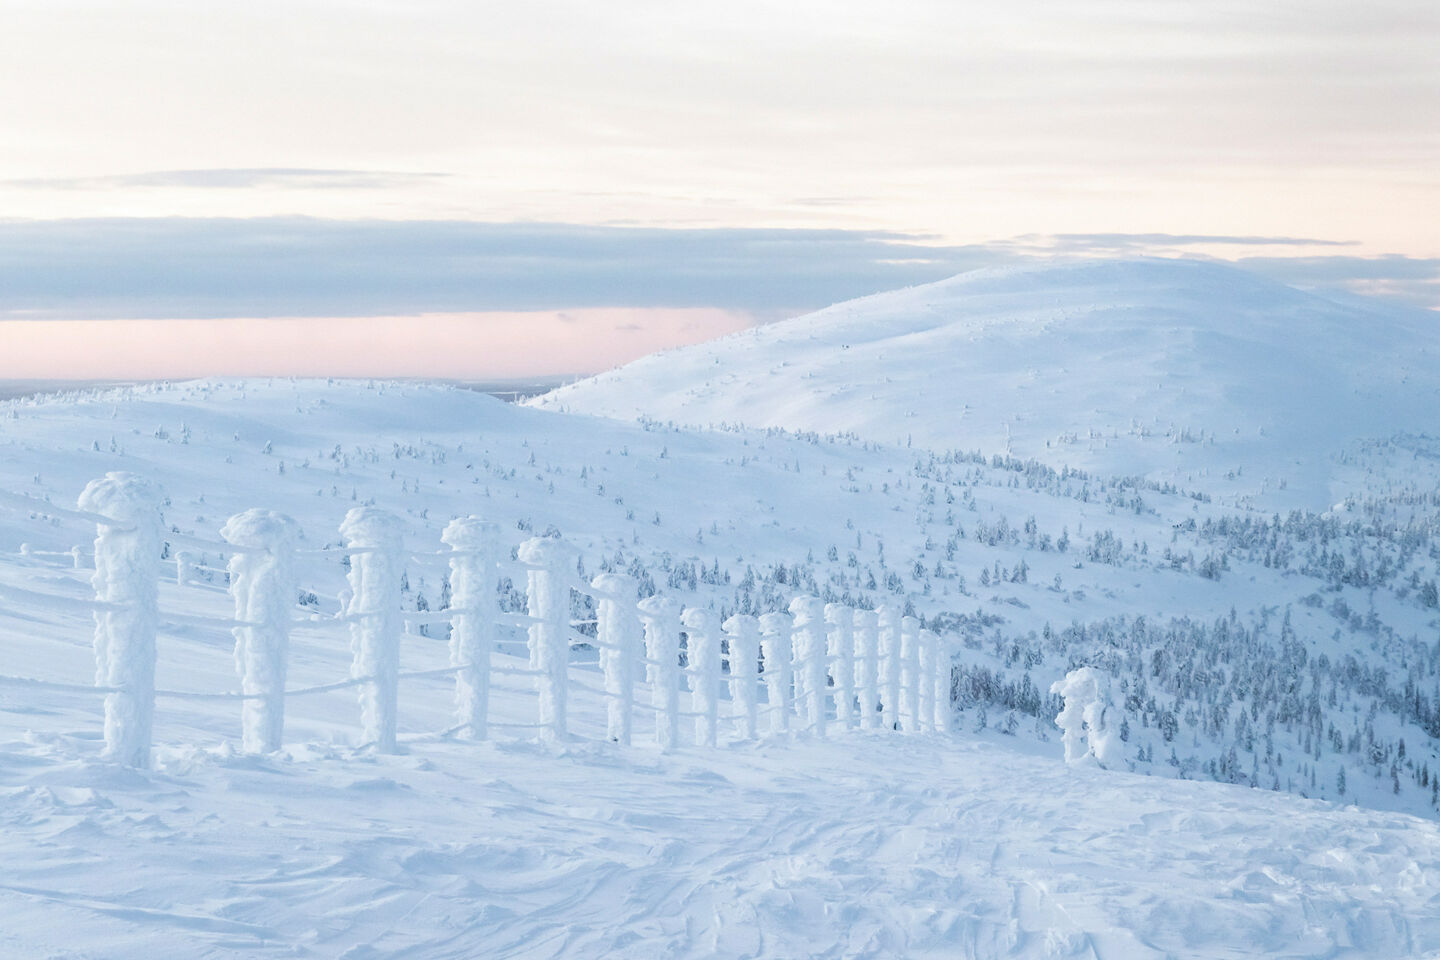 A fence outlined in snow atop Pyhätunturi, a filming location in Finnish Lapland